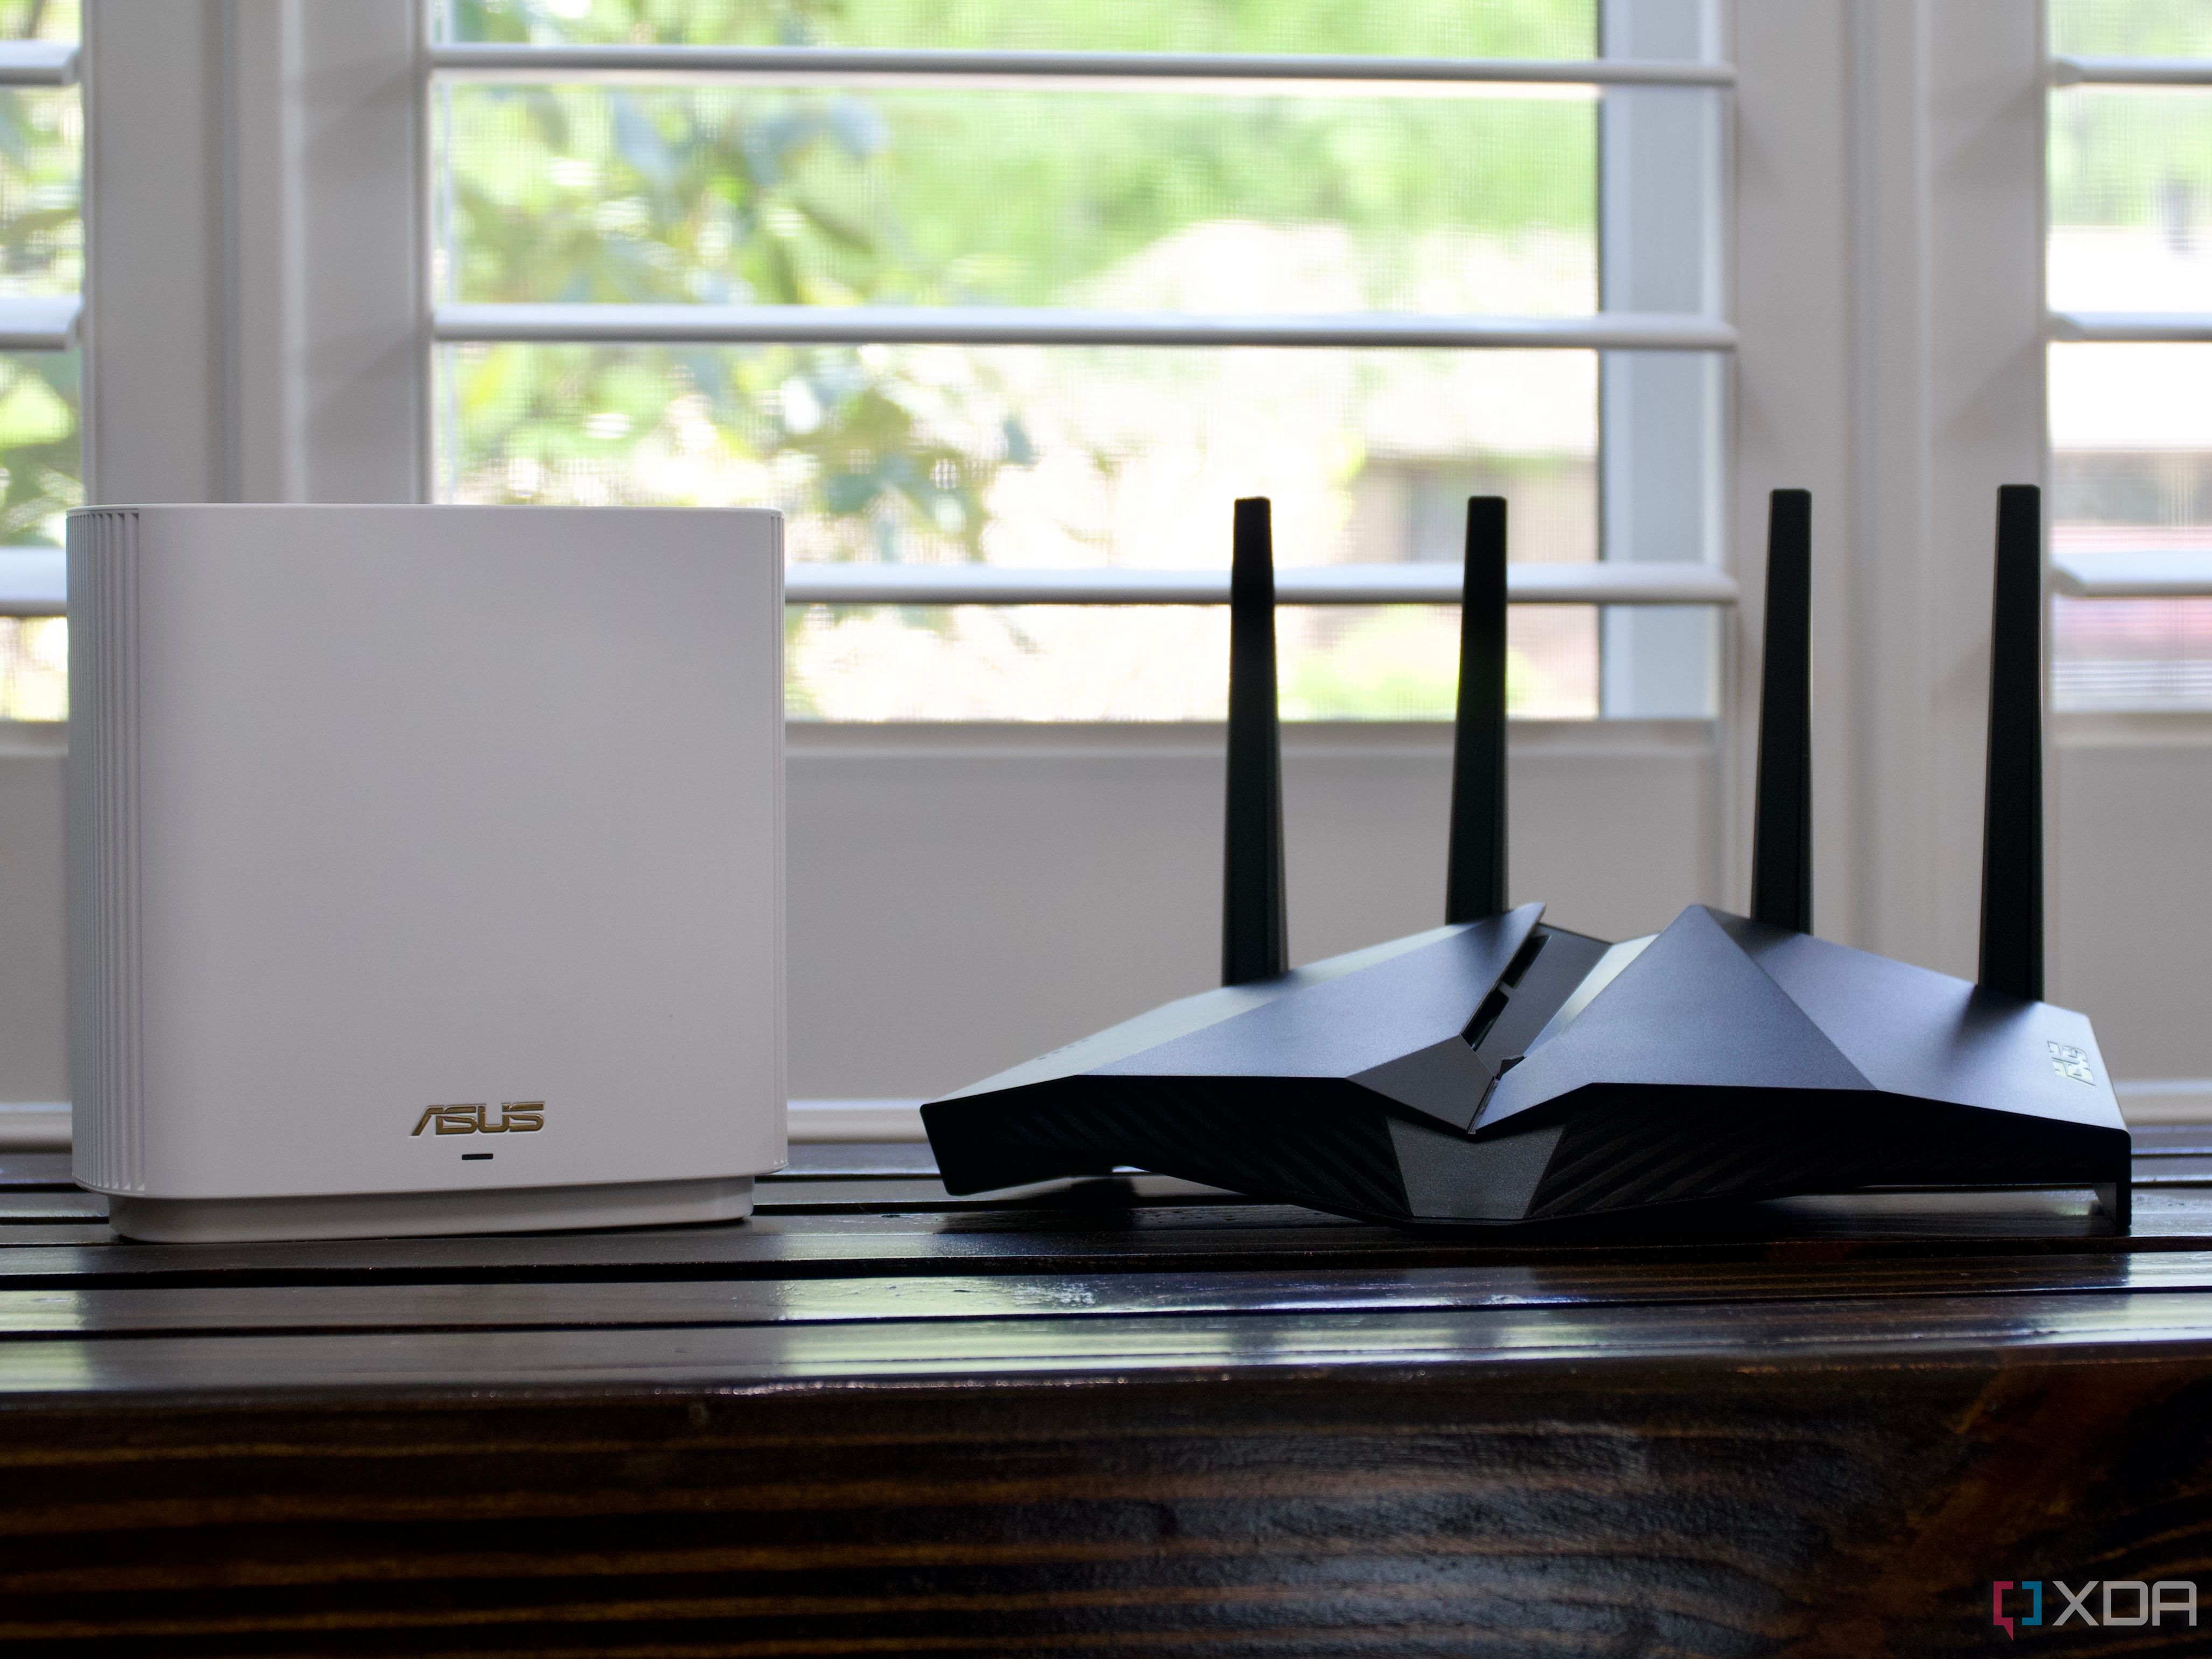 Best ASUS routers in 2023